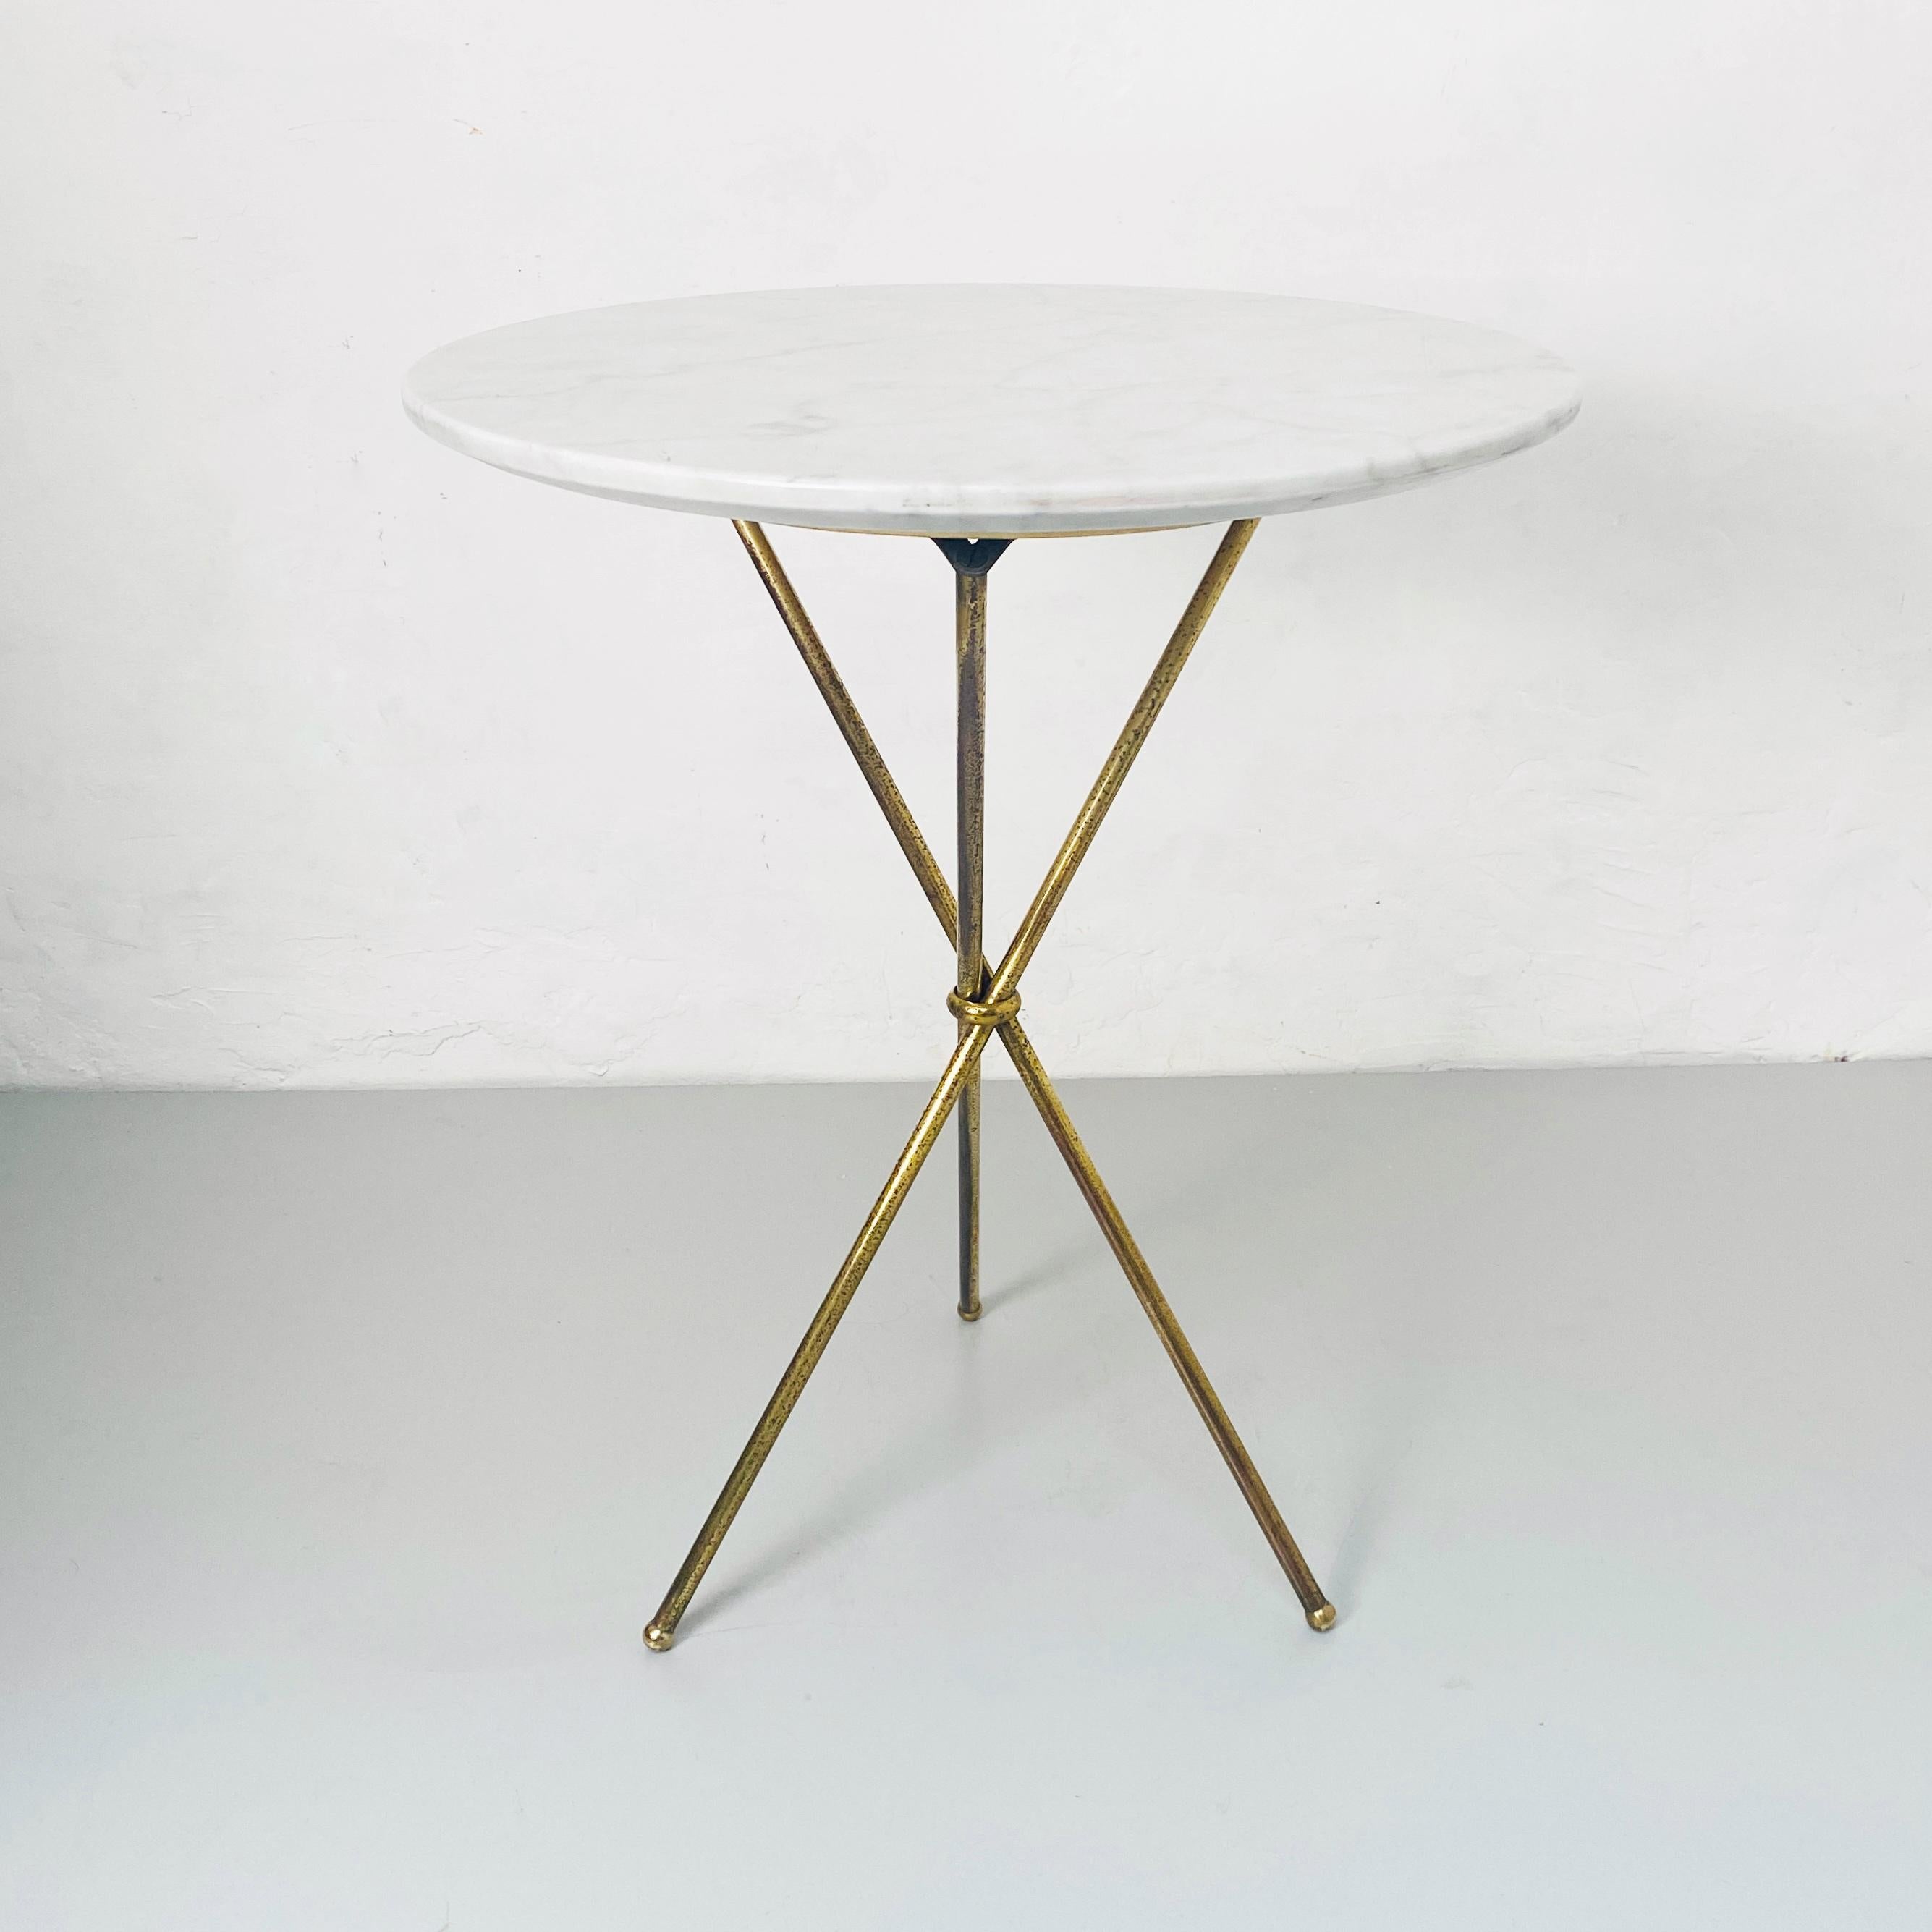 Italian Mid-Century Modern round marble and brass coffee table, 1960s.
Coffee table with round white marble with gray veins and brass legs crossed and welded around a knot.

Round coffee table in marble and brass, 1960s
beautiful small table,